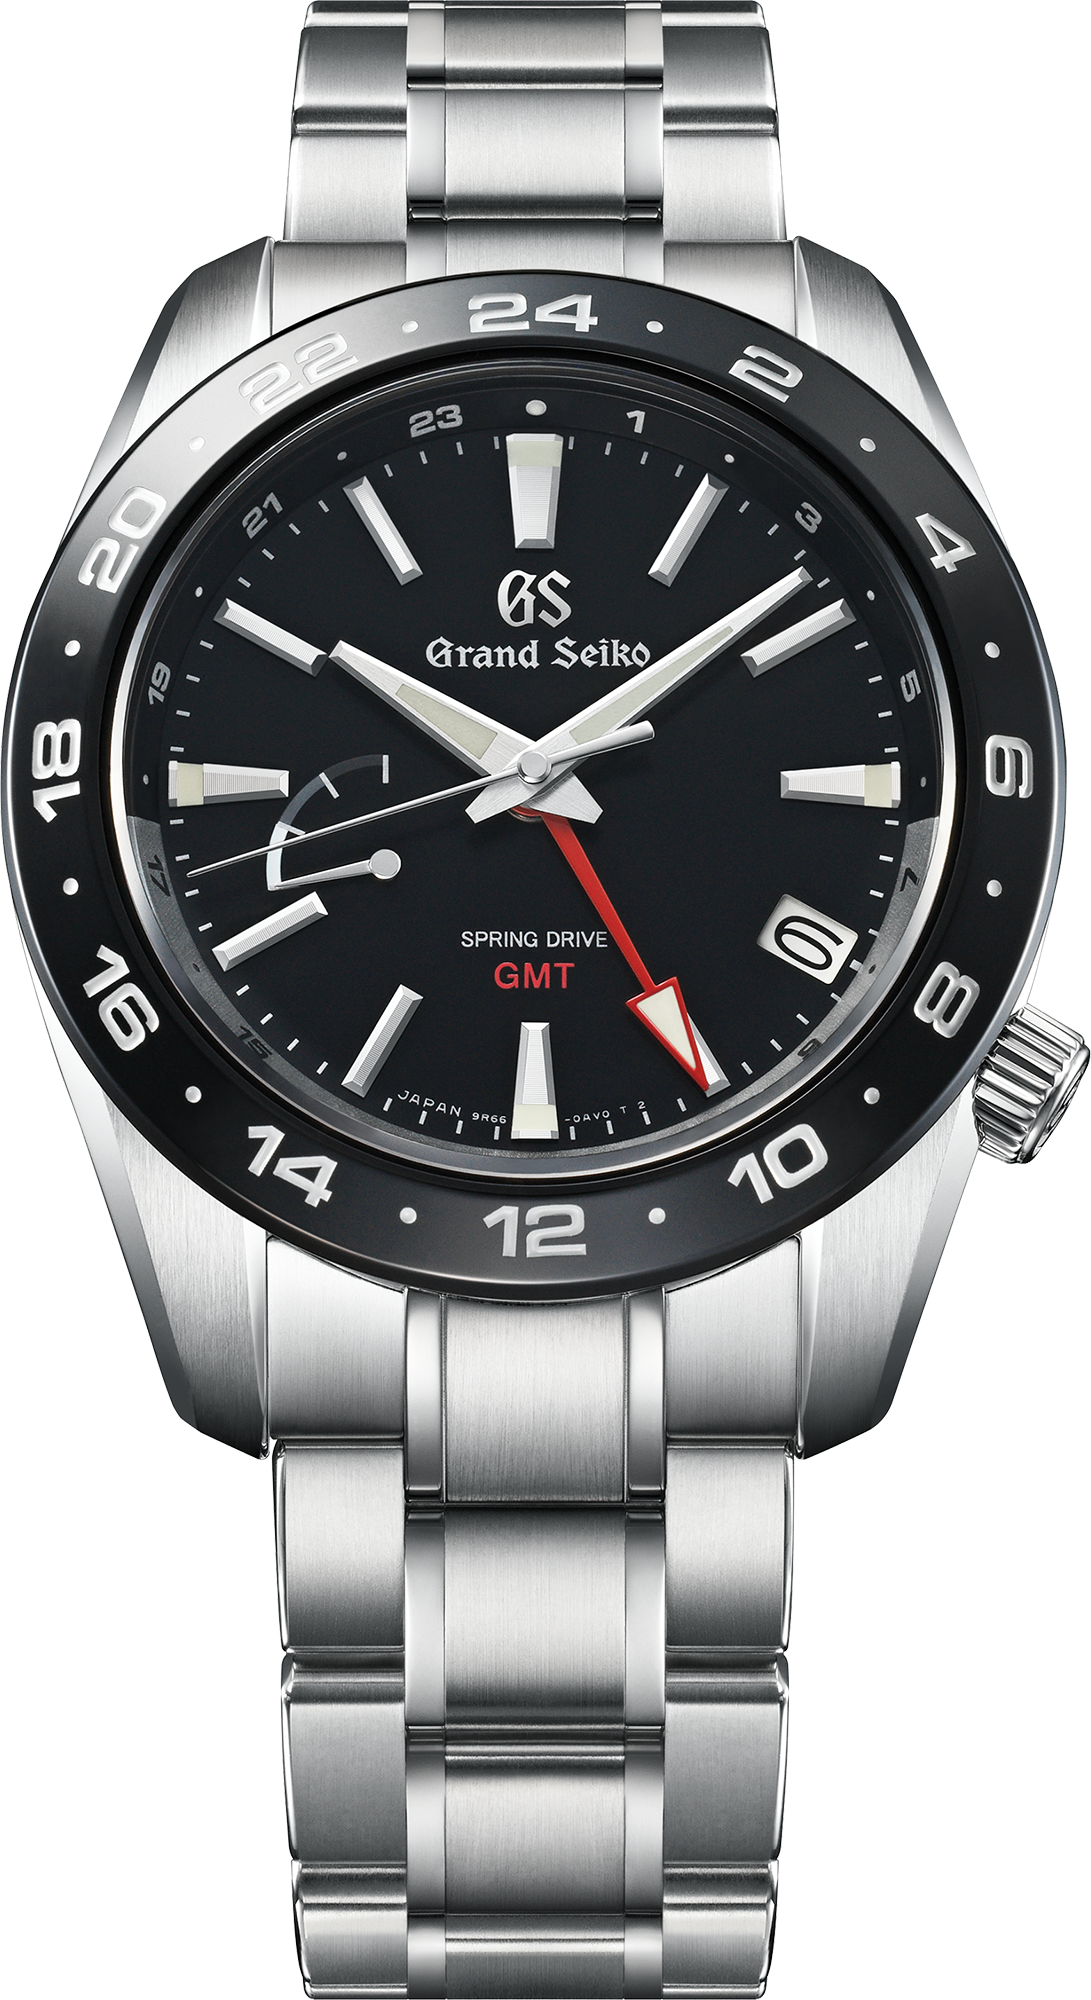 Grand Seiko Watches Official Boutique Online – Grand Seiko Official Boutique